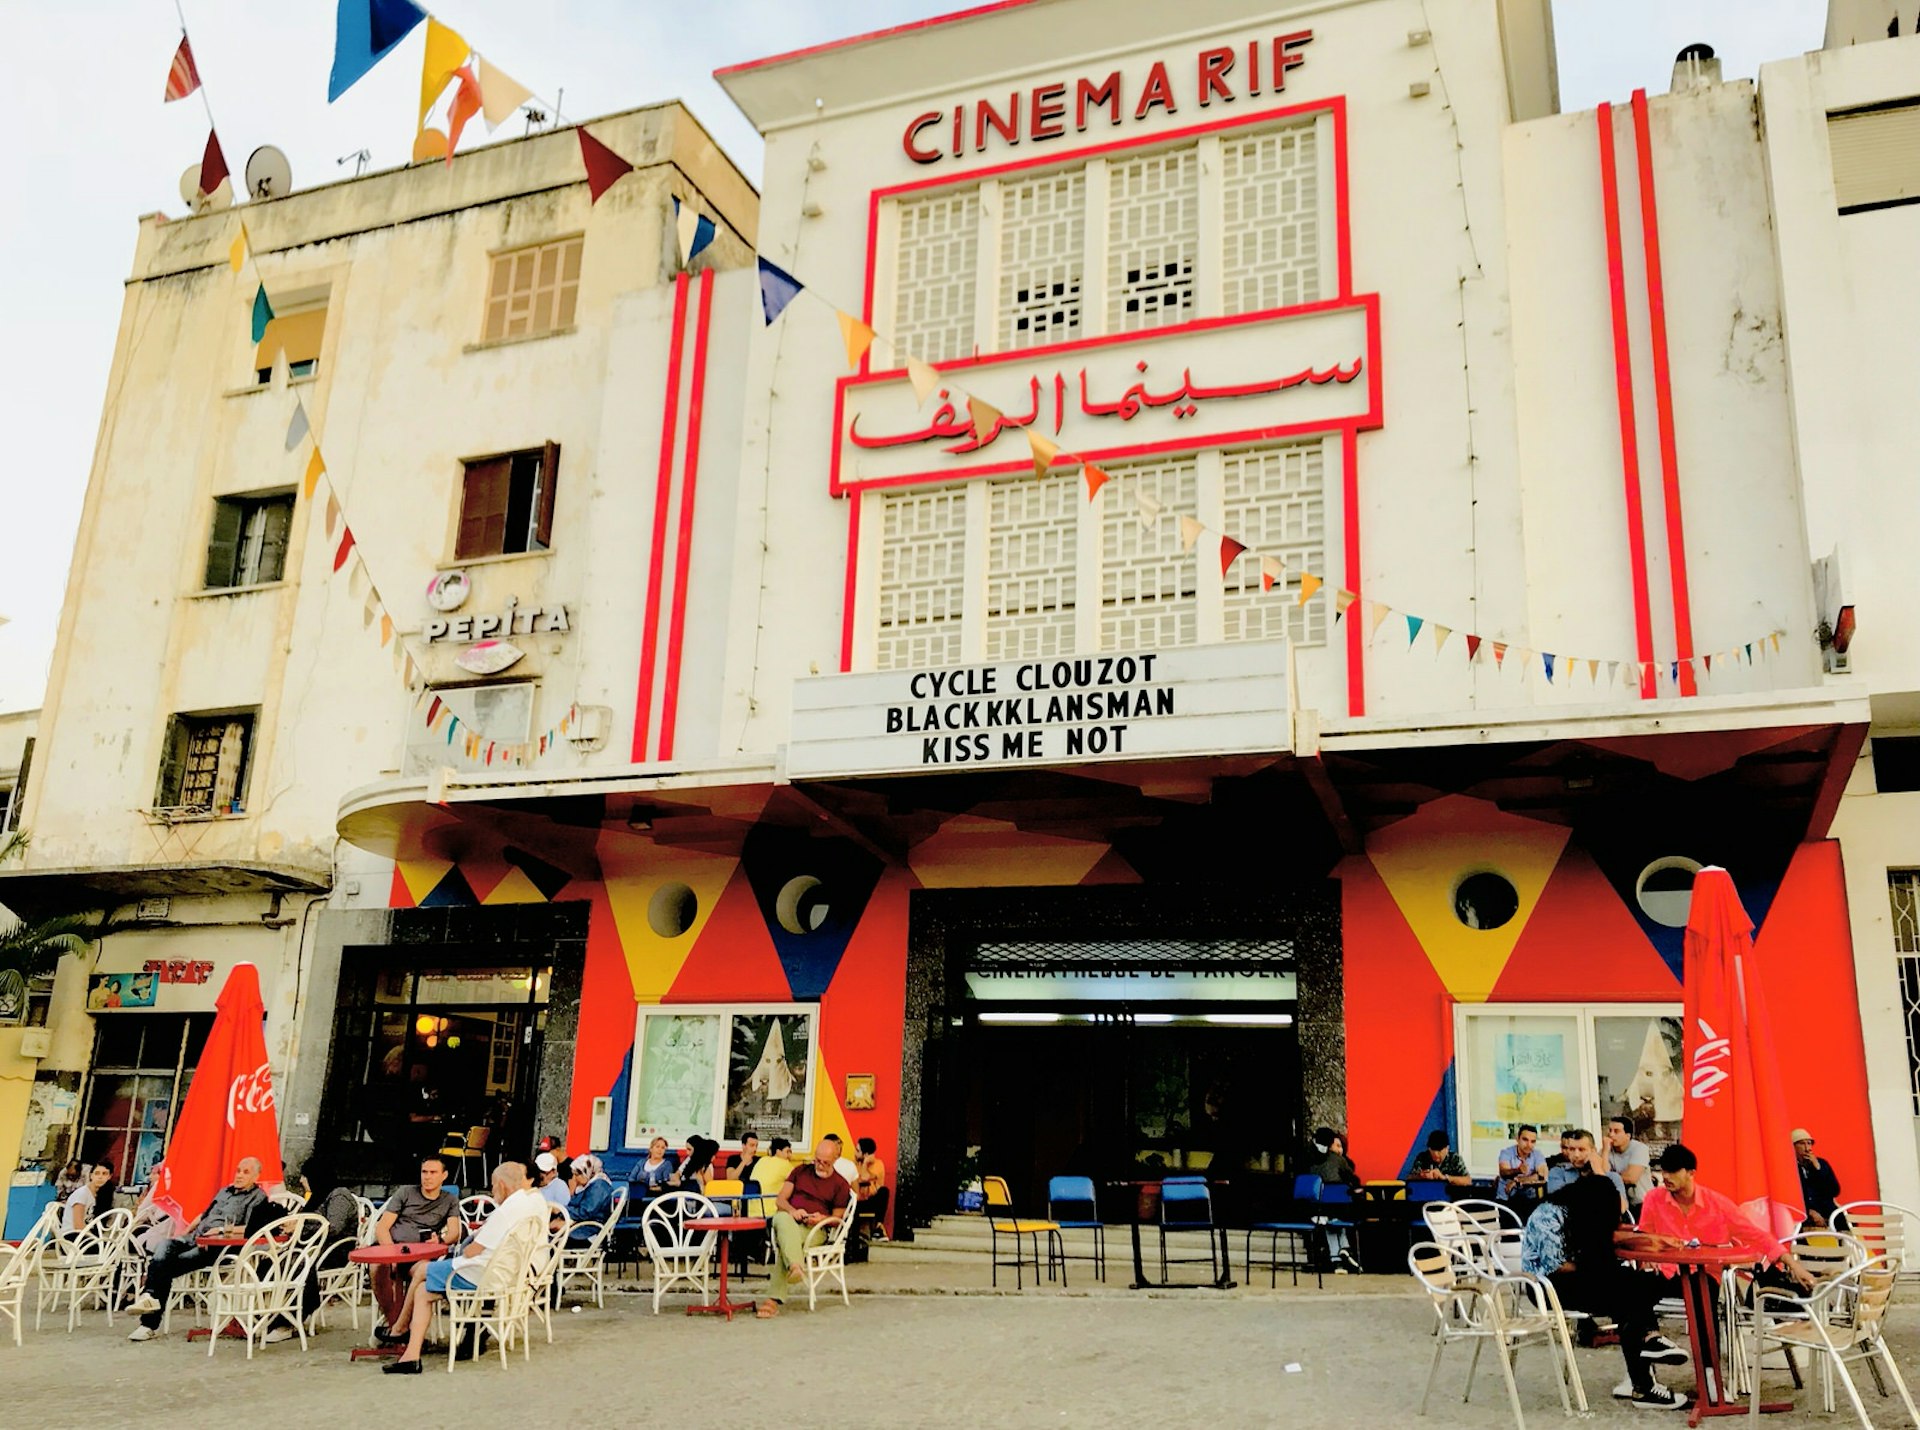 Tables and chairs outside Cinema Rif, Tangier, Morocco